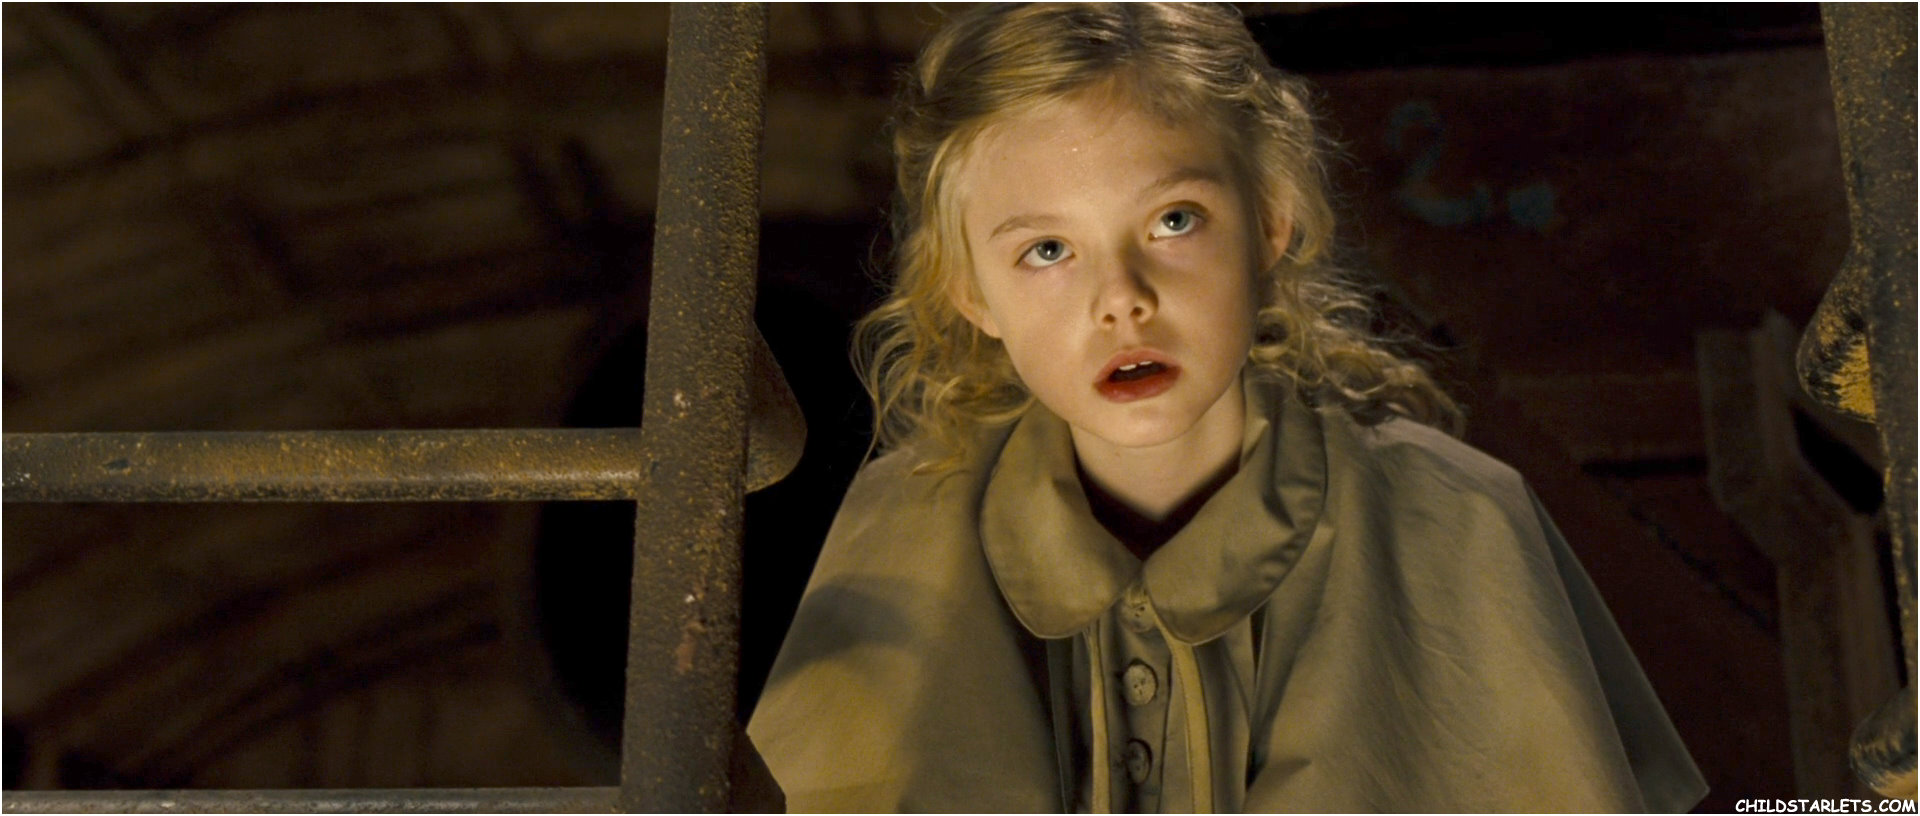 Elle Fanning Child Actress Images/Pictures/Photos/Videos Gallery - CHILDSTARLETS.COM